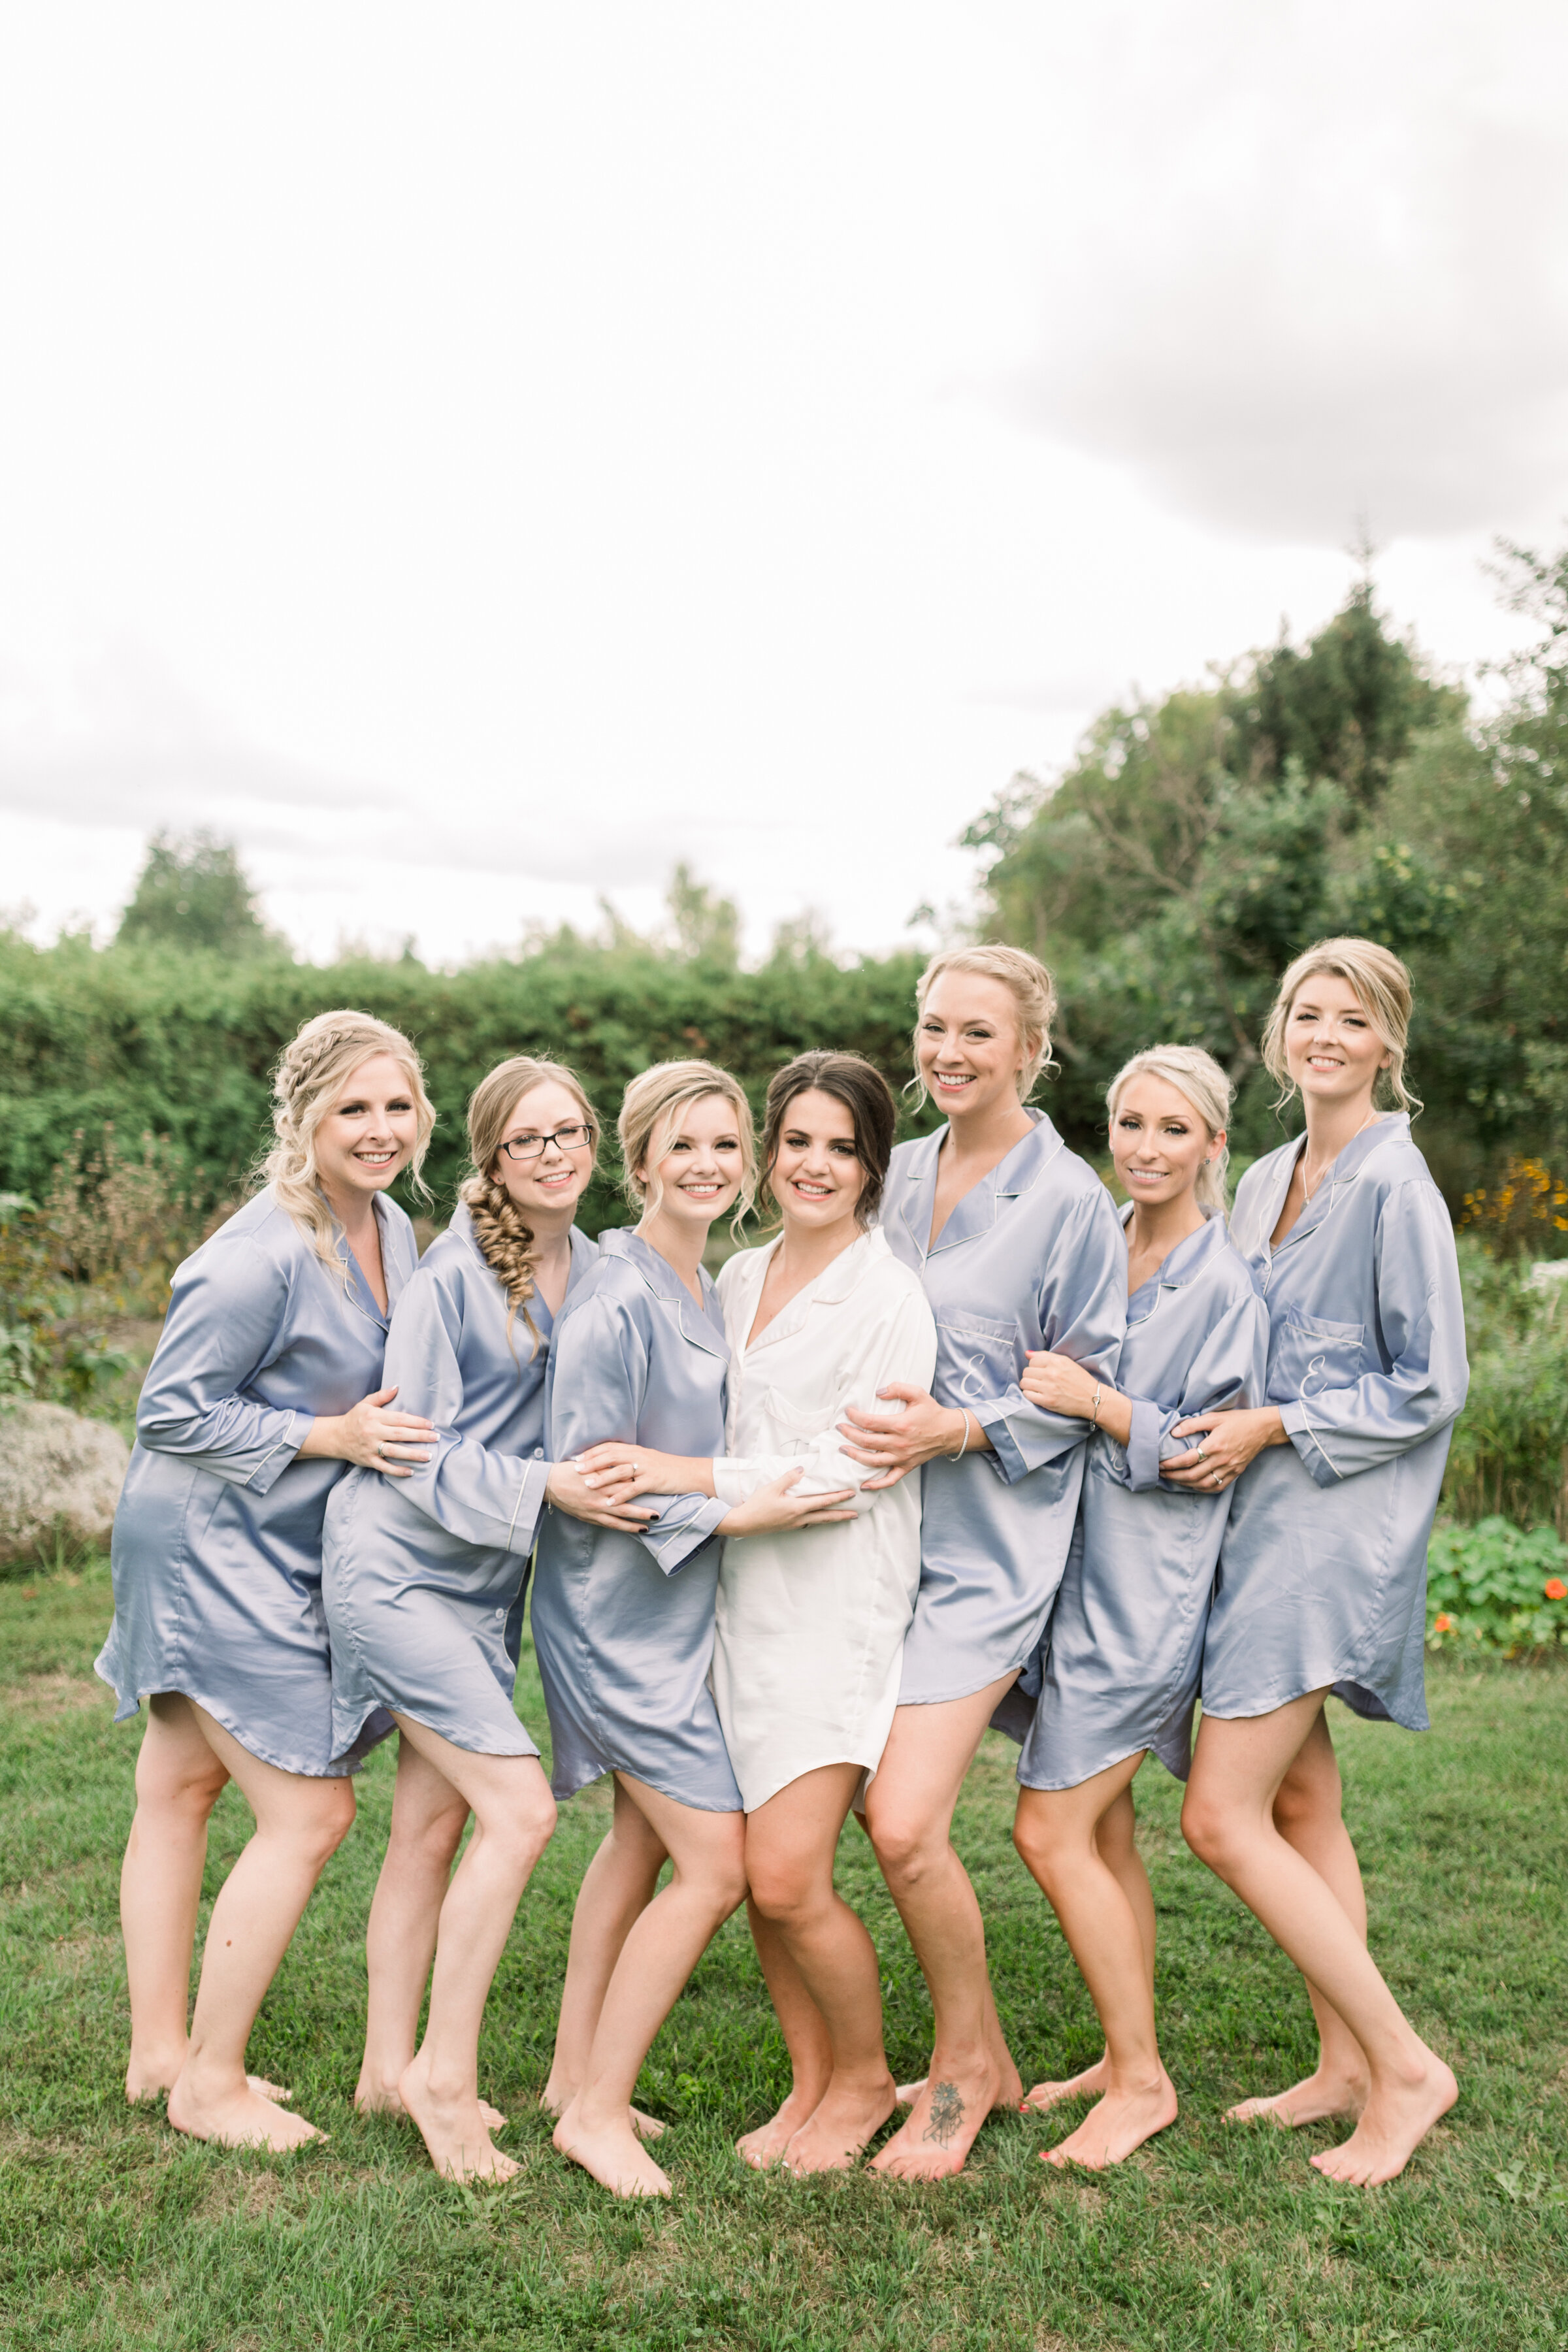  Bridal party wearing matching light blue silk pajamas making for the perfect bridesmaid gift by Chelsea Mason Photography in Ottawa, ON. herb garden wedding venue perfect outdoor wedding venue in carleton place what gift should i get my bridesmaids 